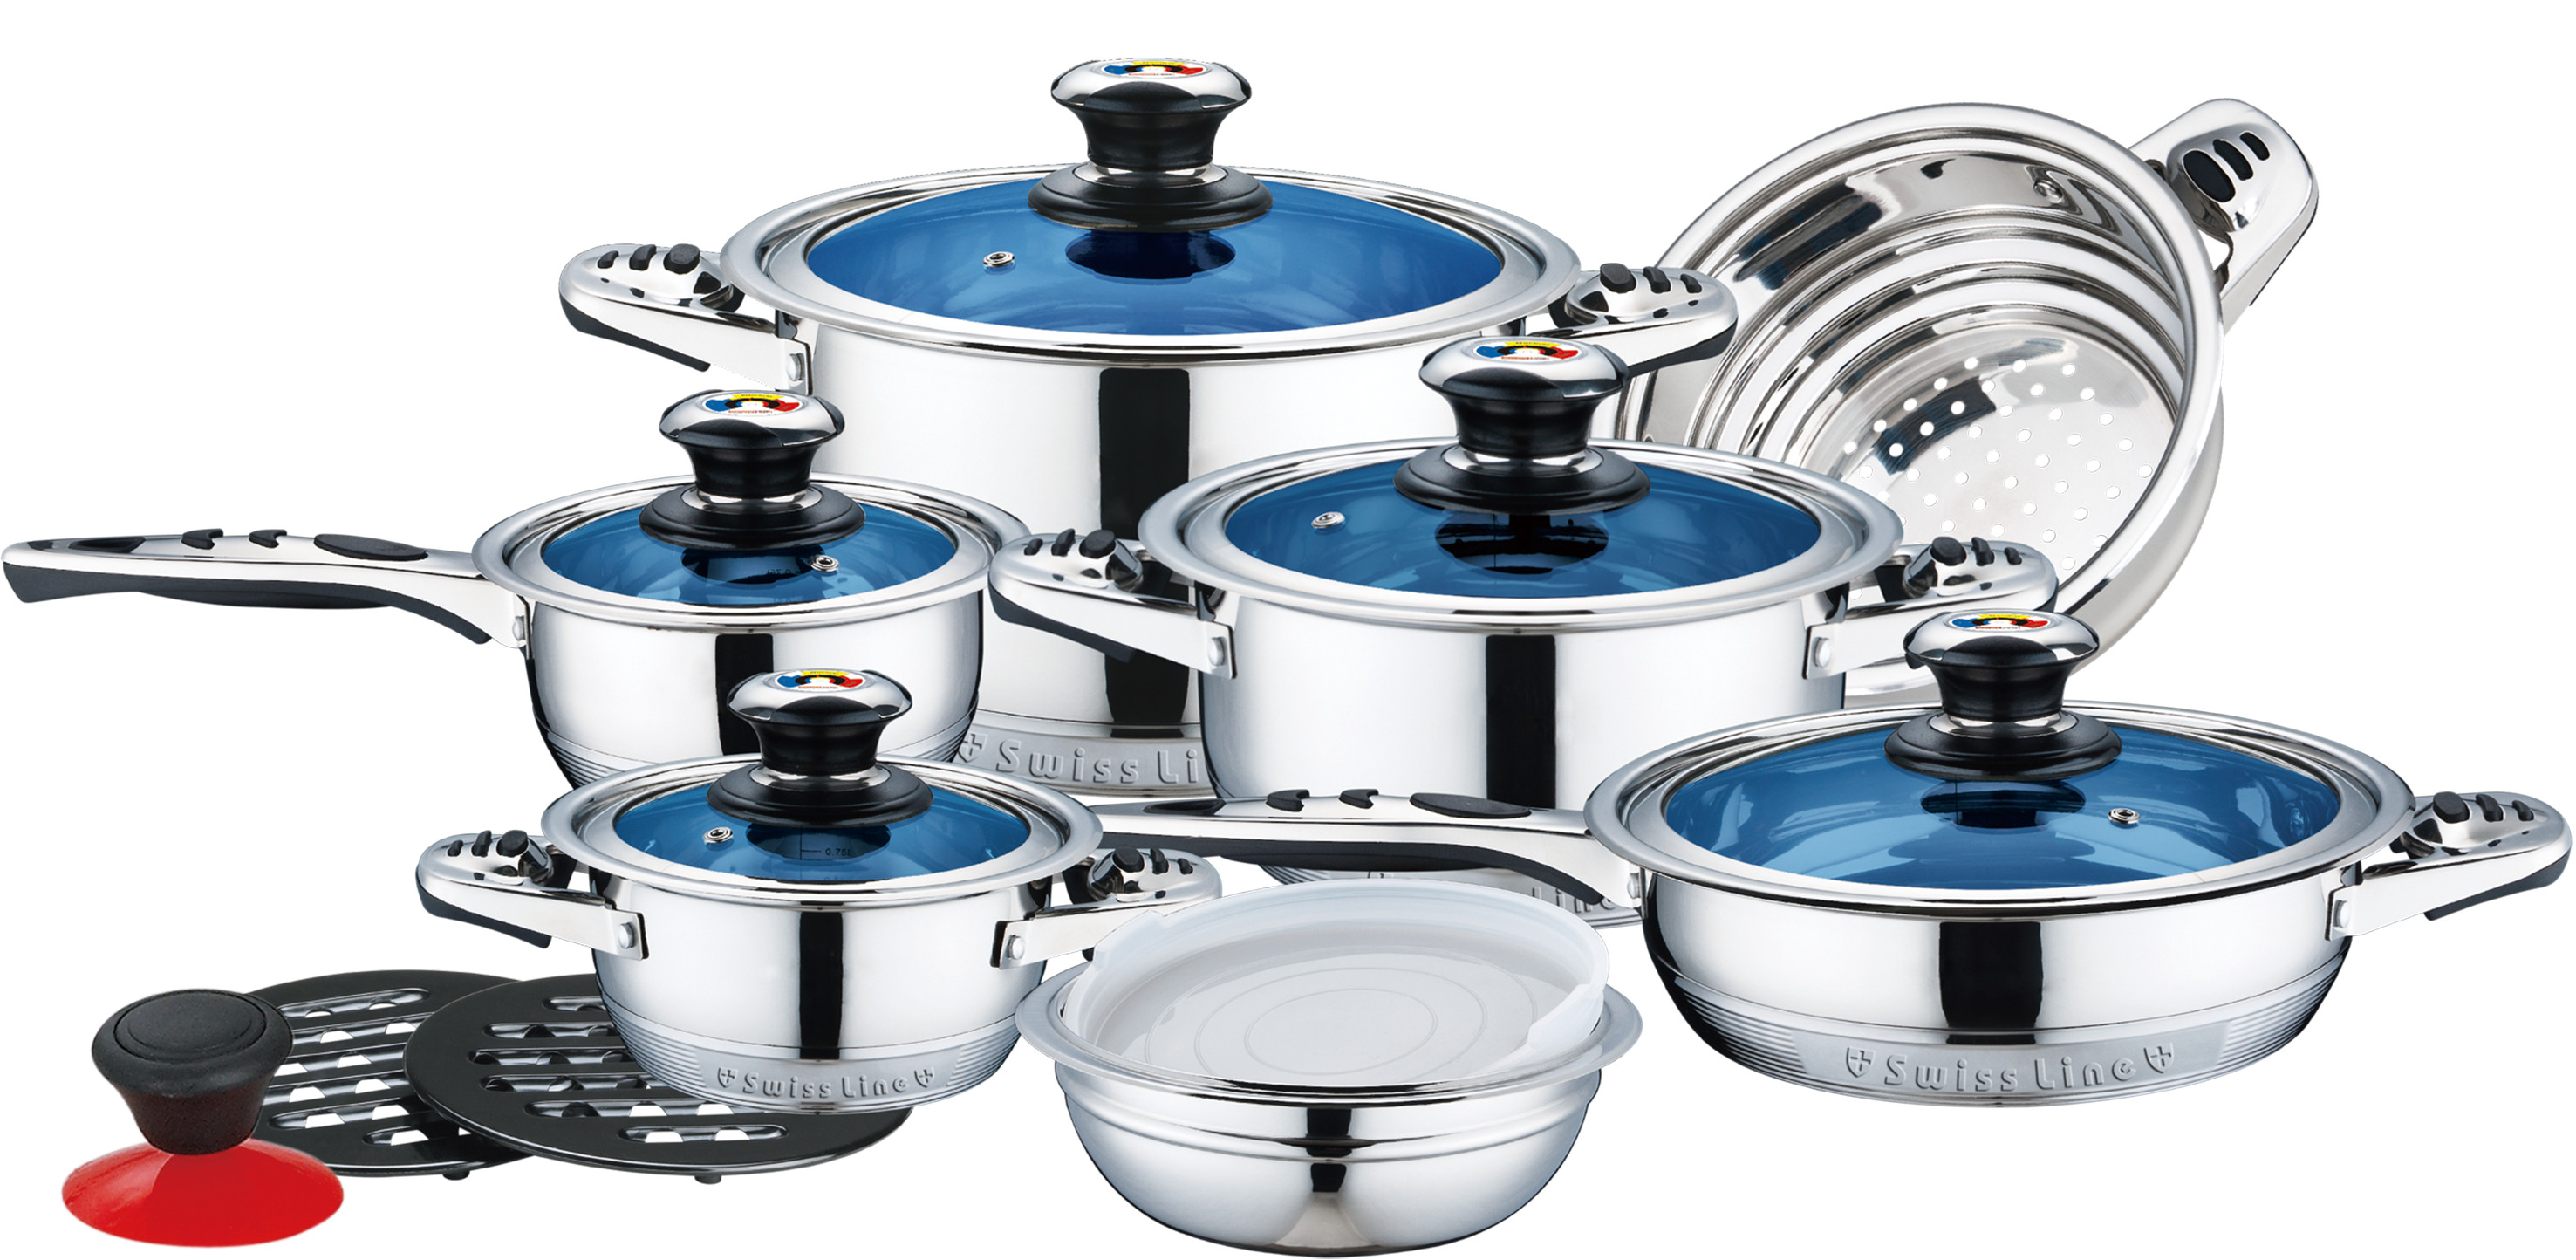 16pcs blue glass lids stainless steel cookware set with fish bone shape handle